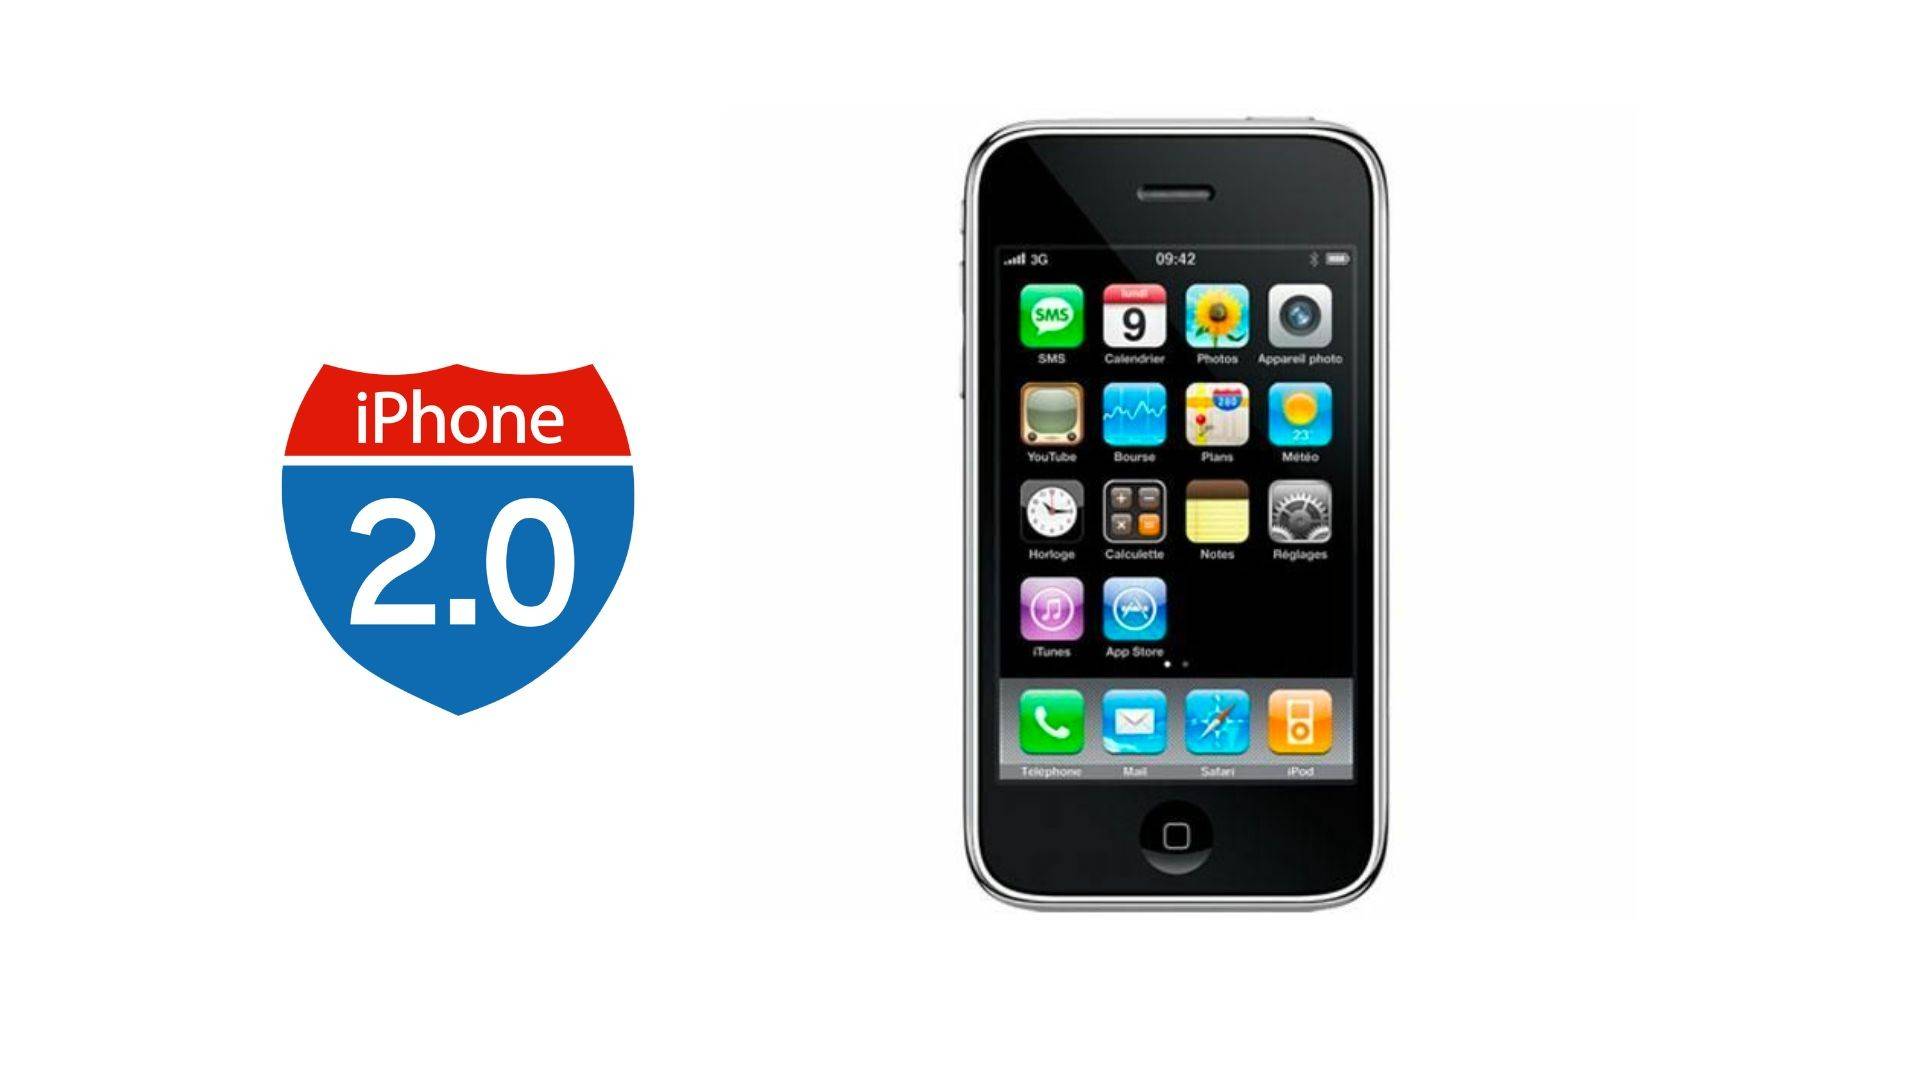 Apple iPhone OS 2 on iPhone 3G